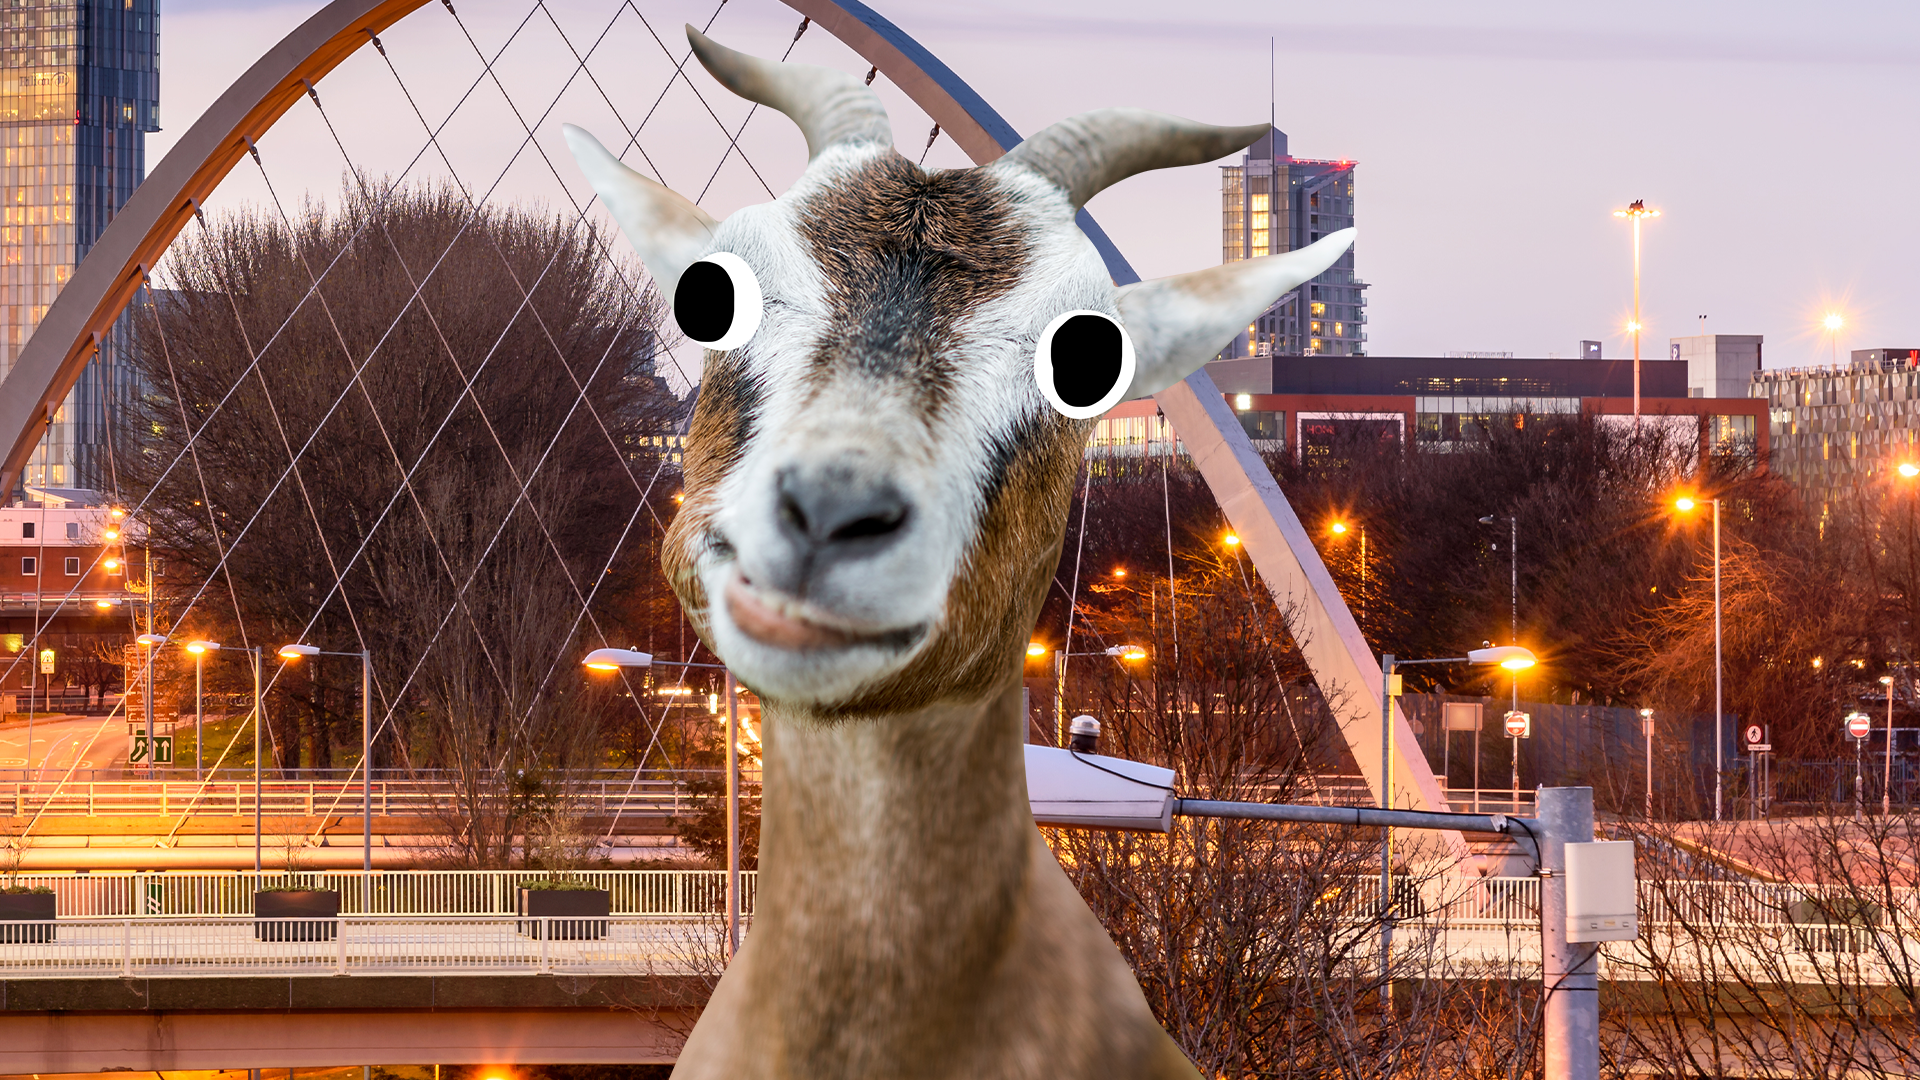 Derpy goat in front of city